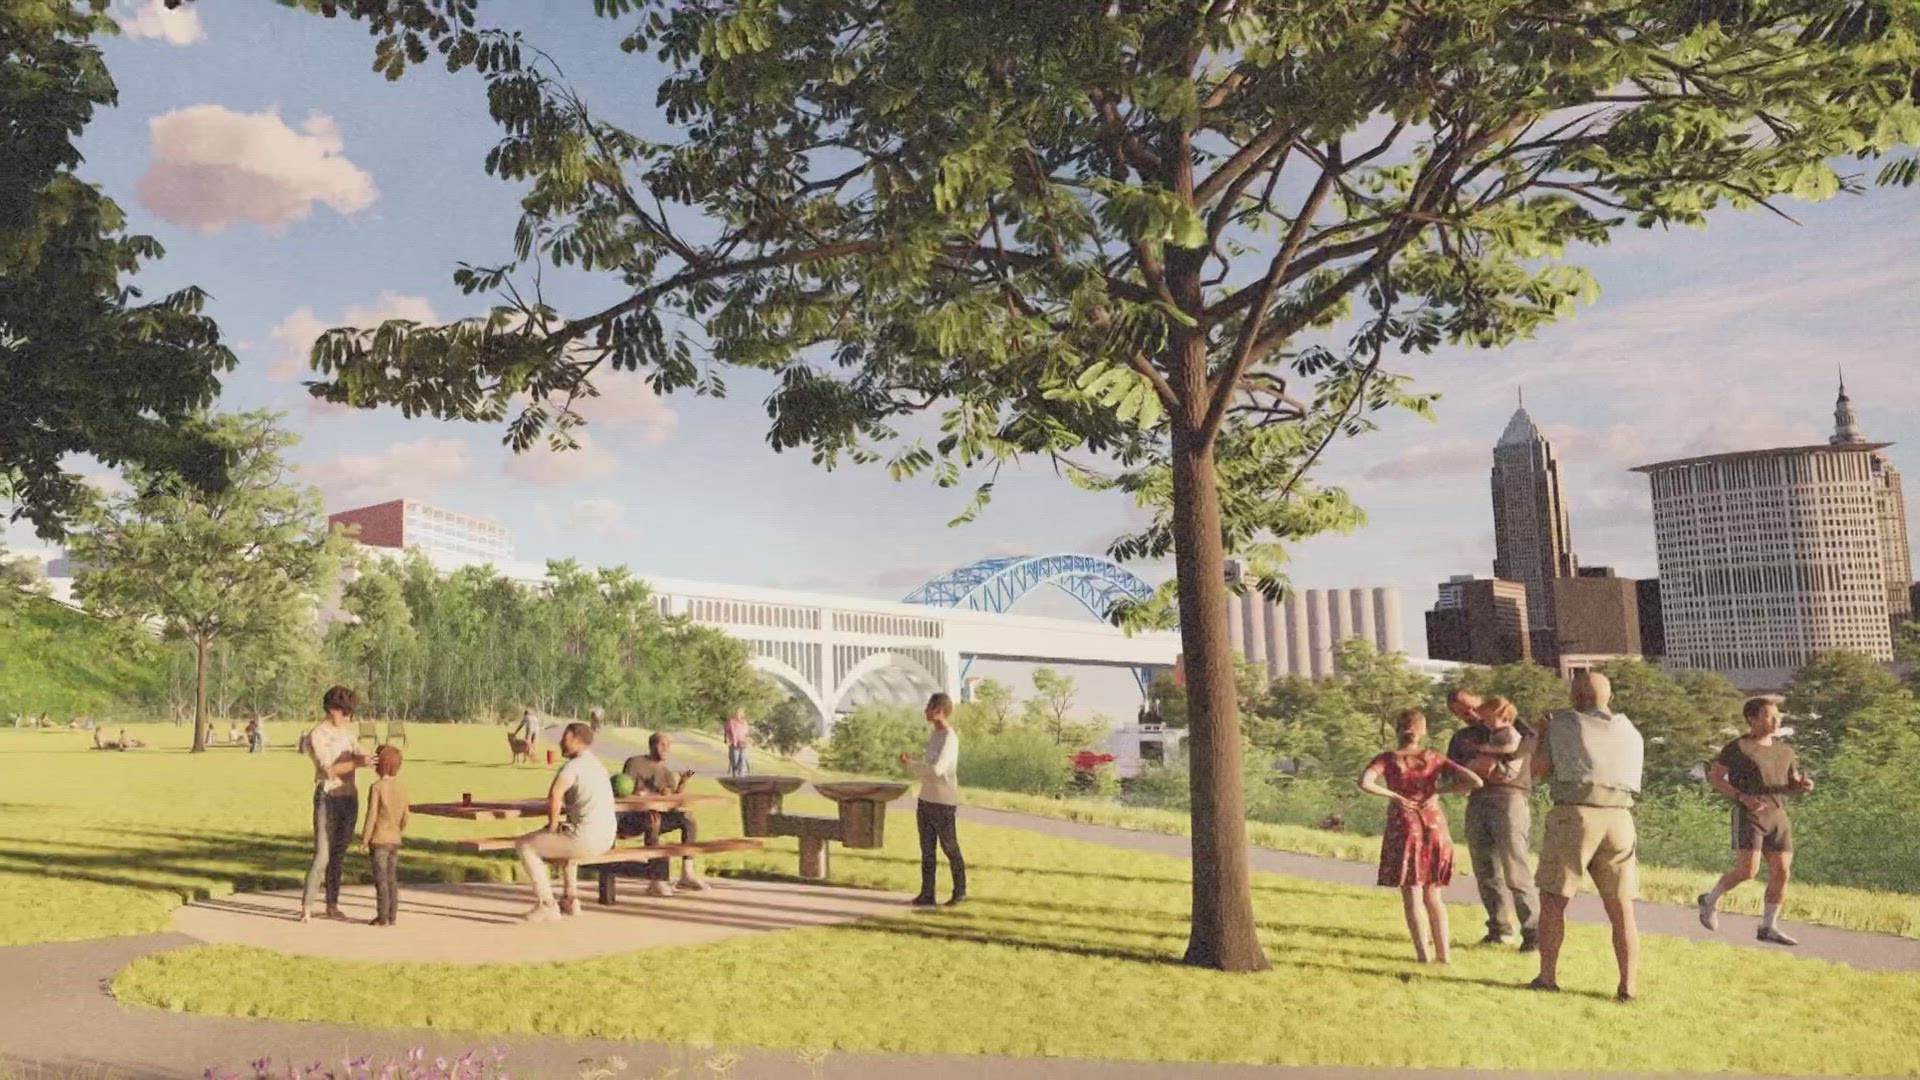 Irishtown Bend Park will connect Ohio City on Cleveland's near west side to the Flats, downtown Cleveland and Lake Erie.